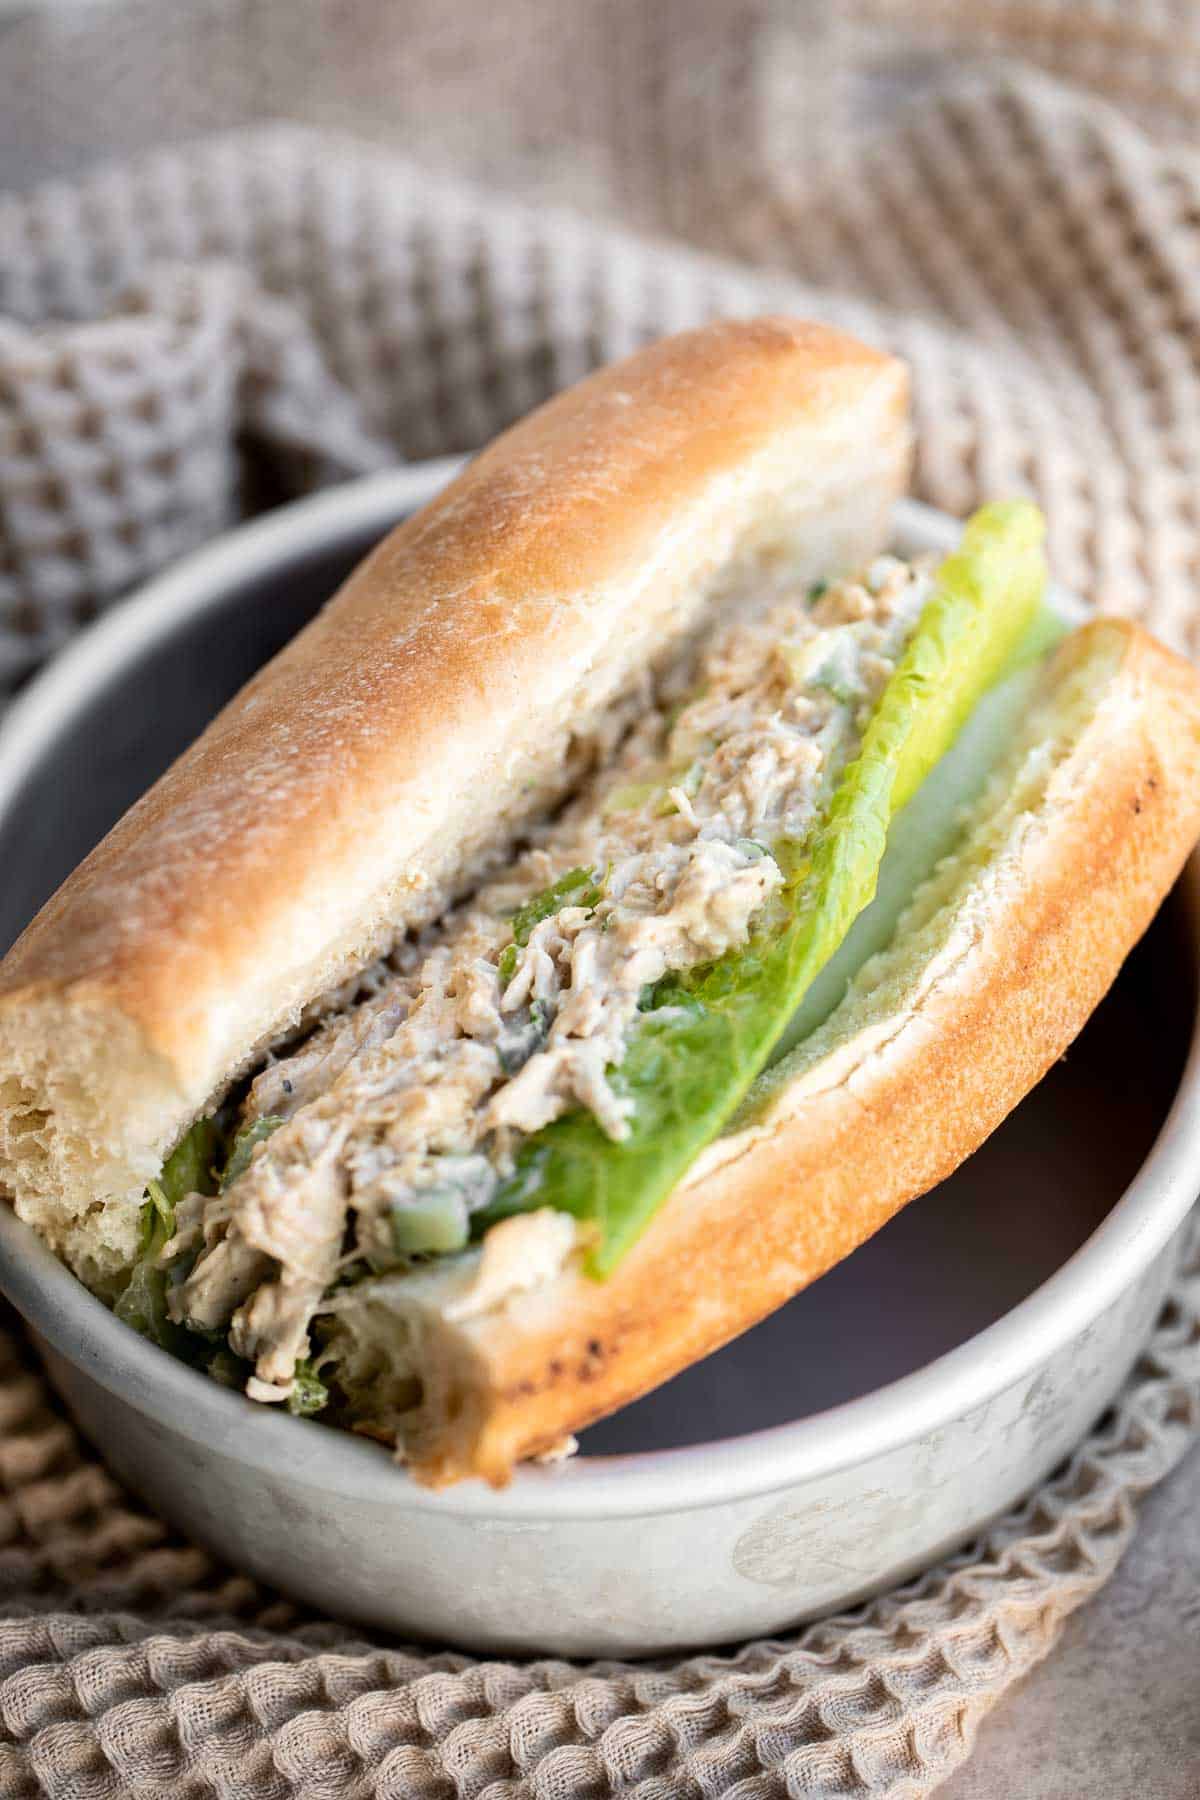 This Leftover Turkey Salad is a creamy and filling salad that is quick and easy to make — and your new go-to recipe for using Thanksgiving leftovers! | aheadofthyme.com